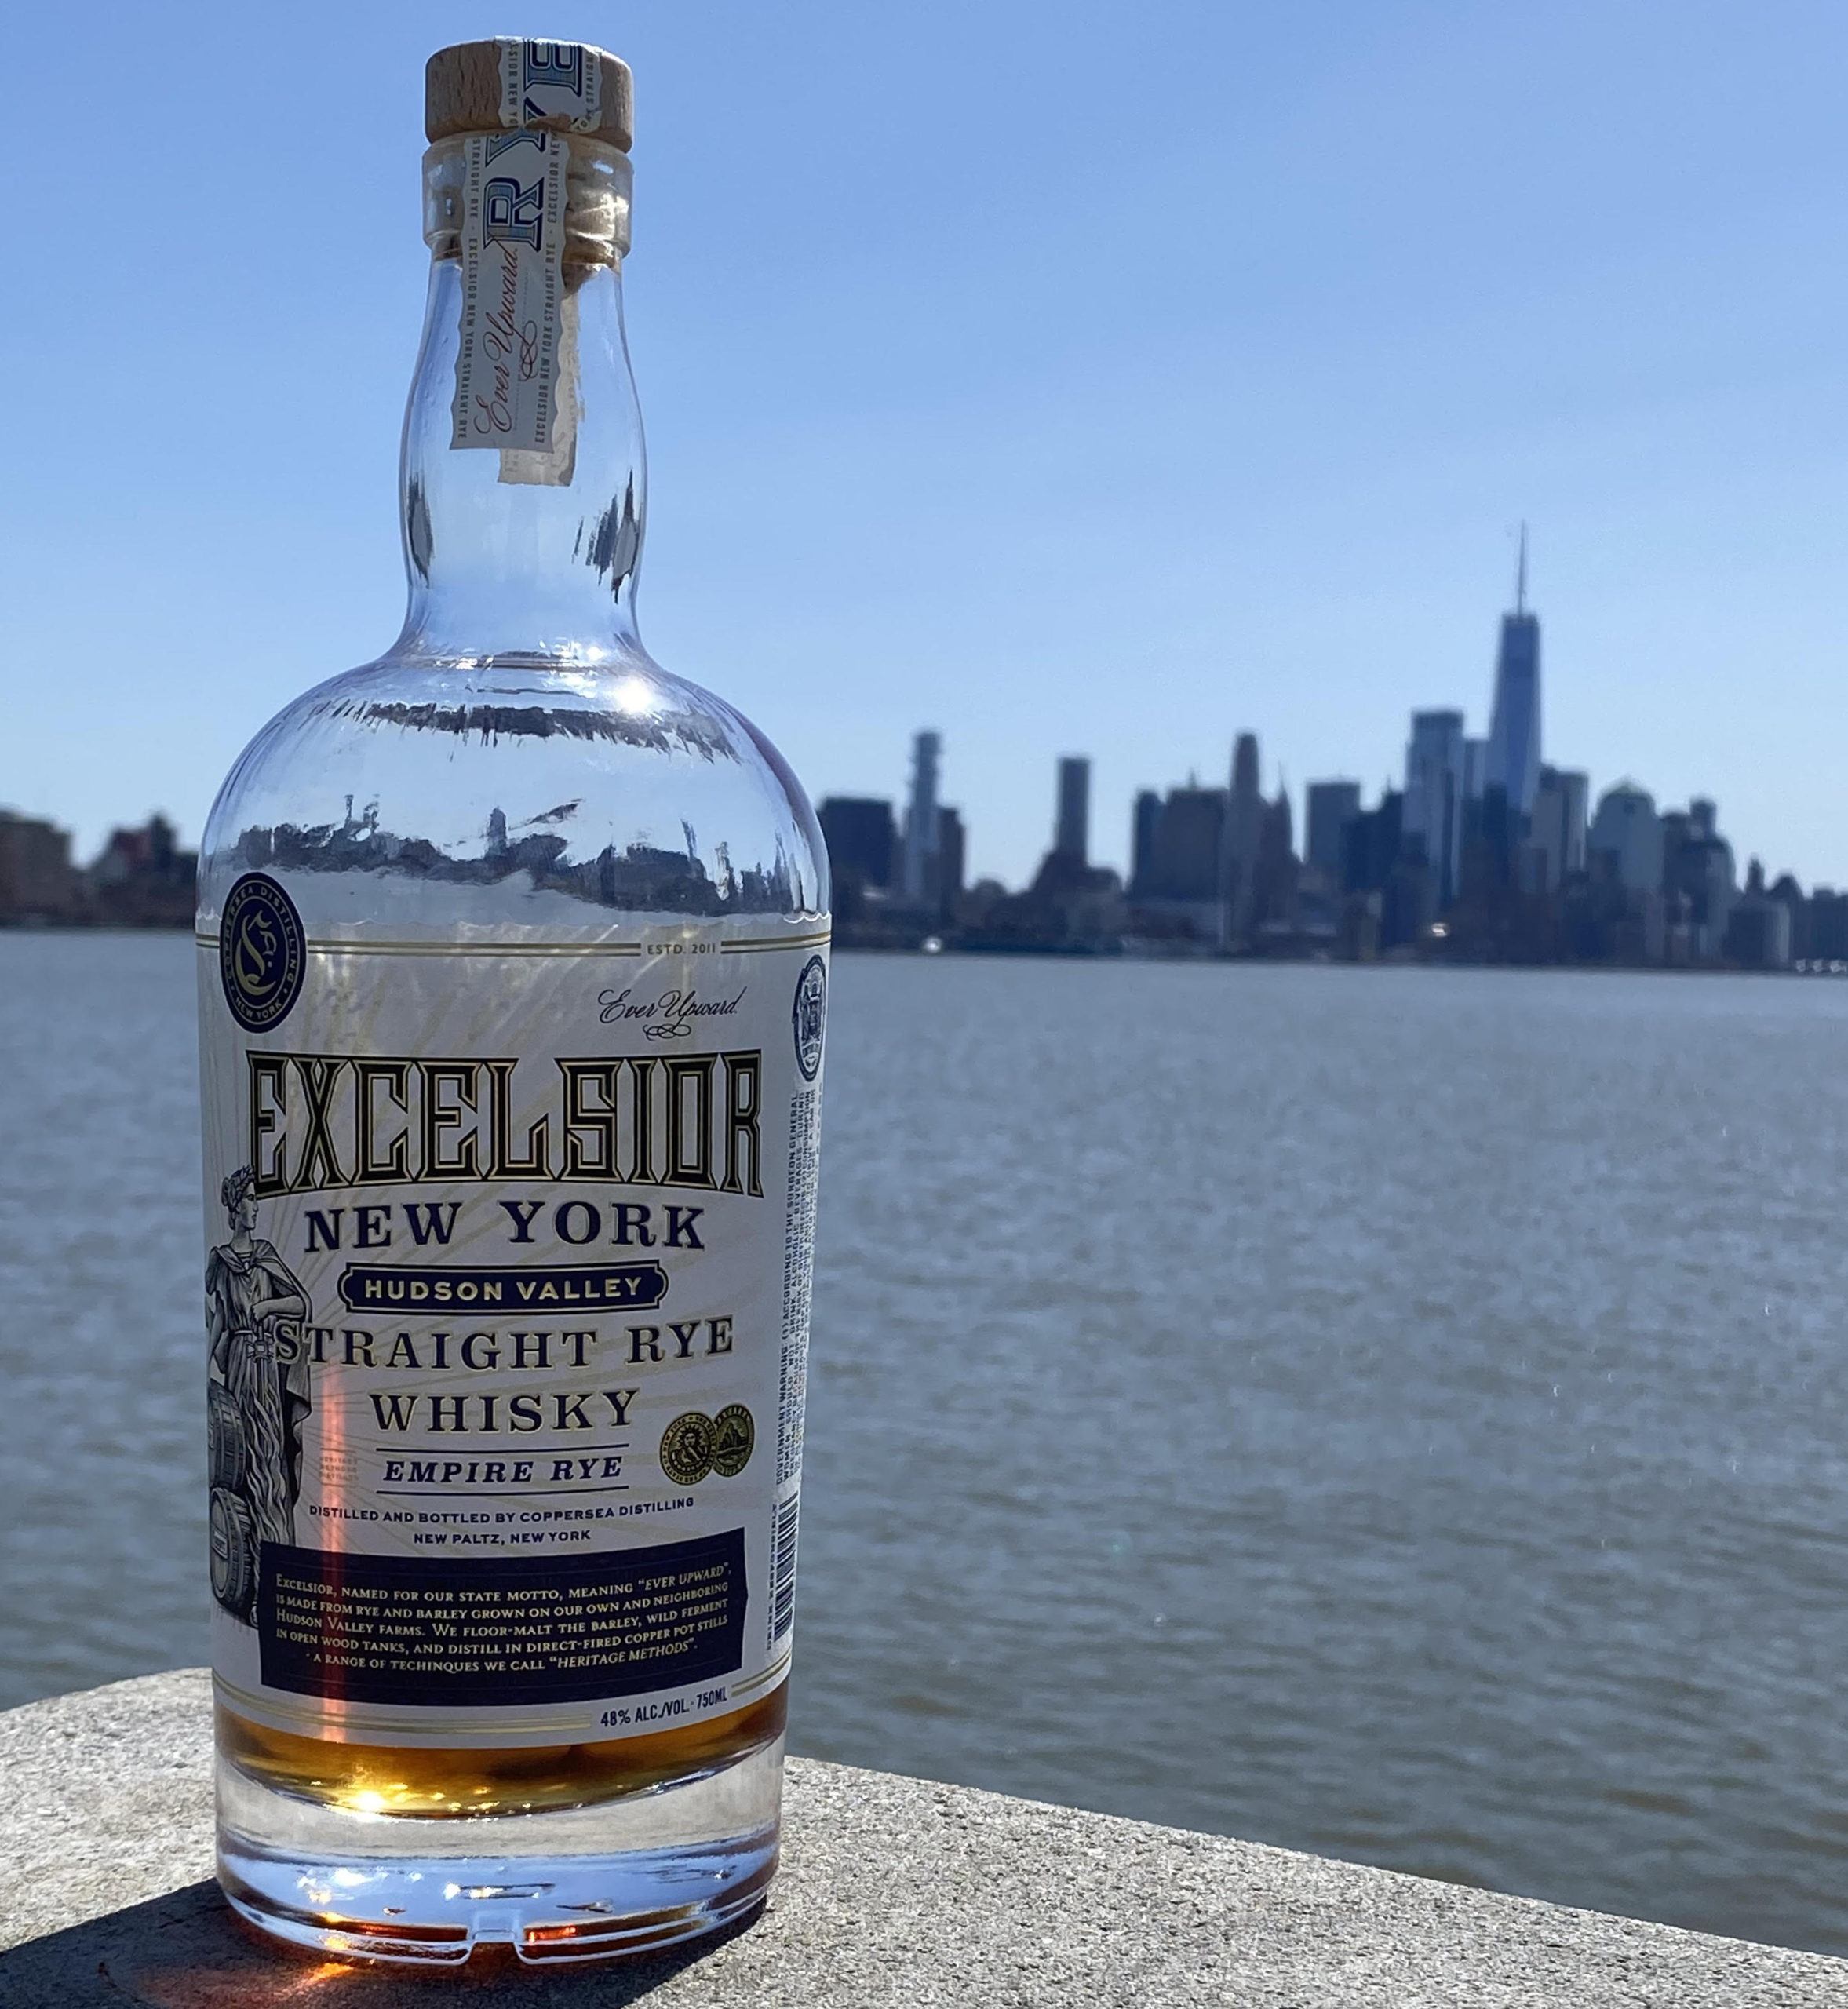 Excelsior Straight Rye